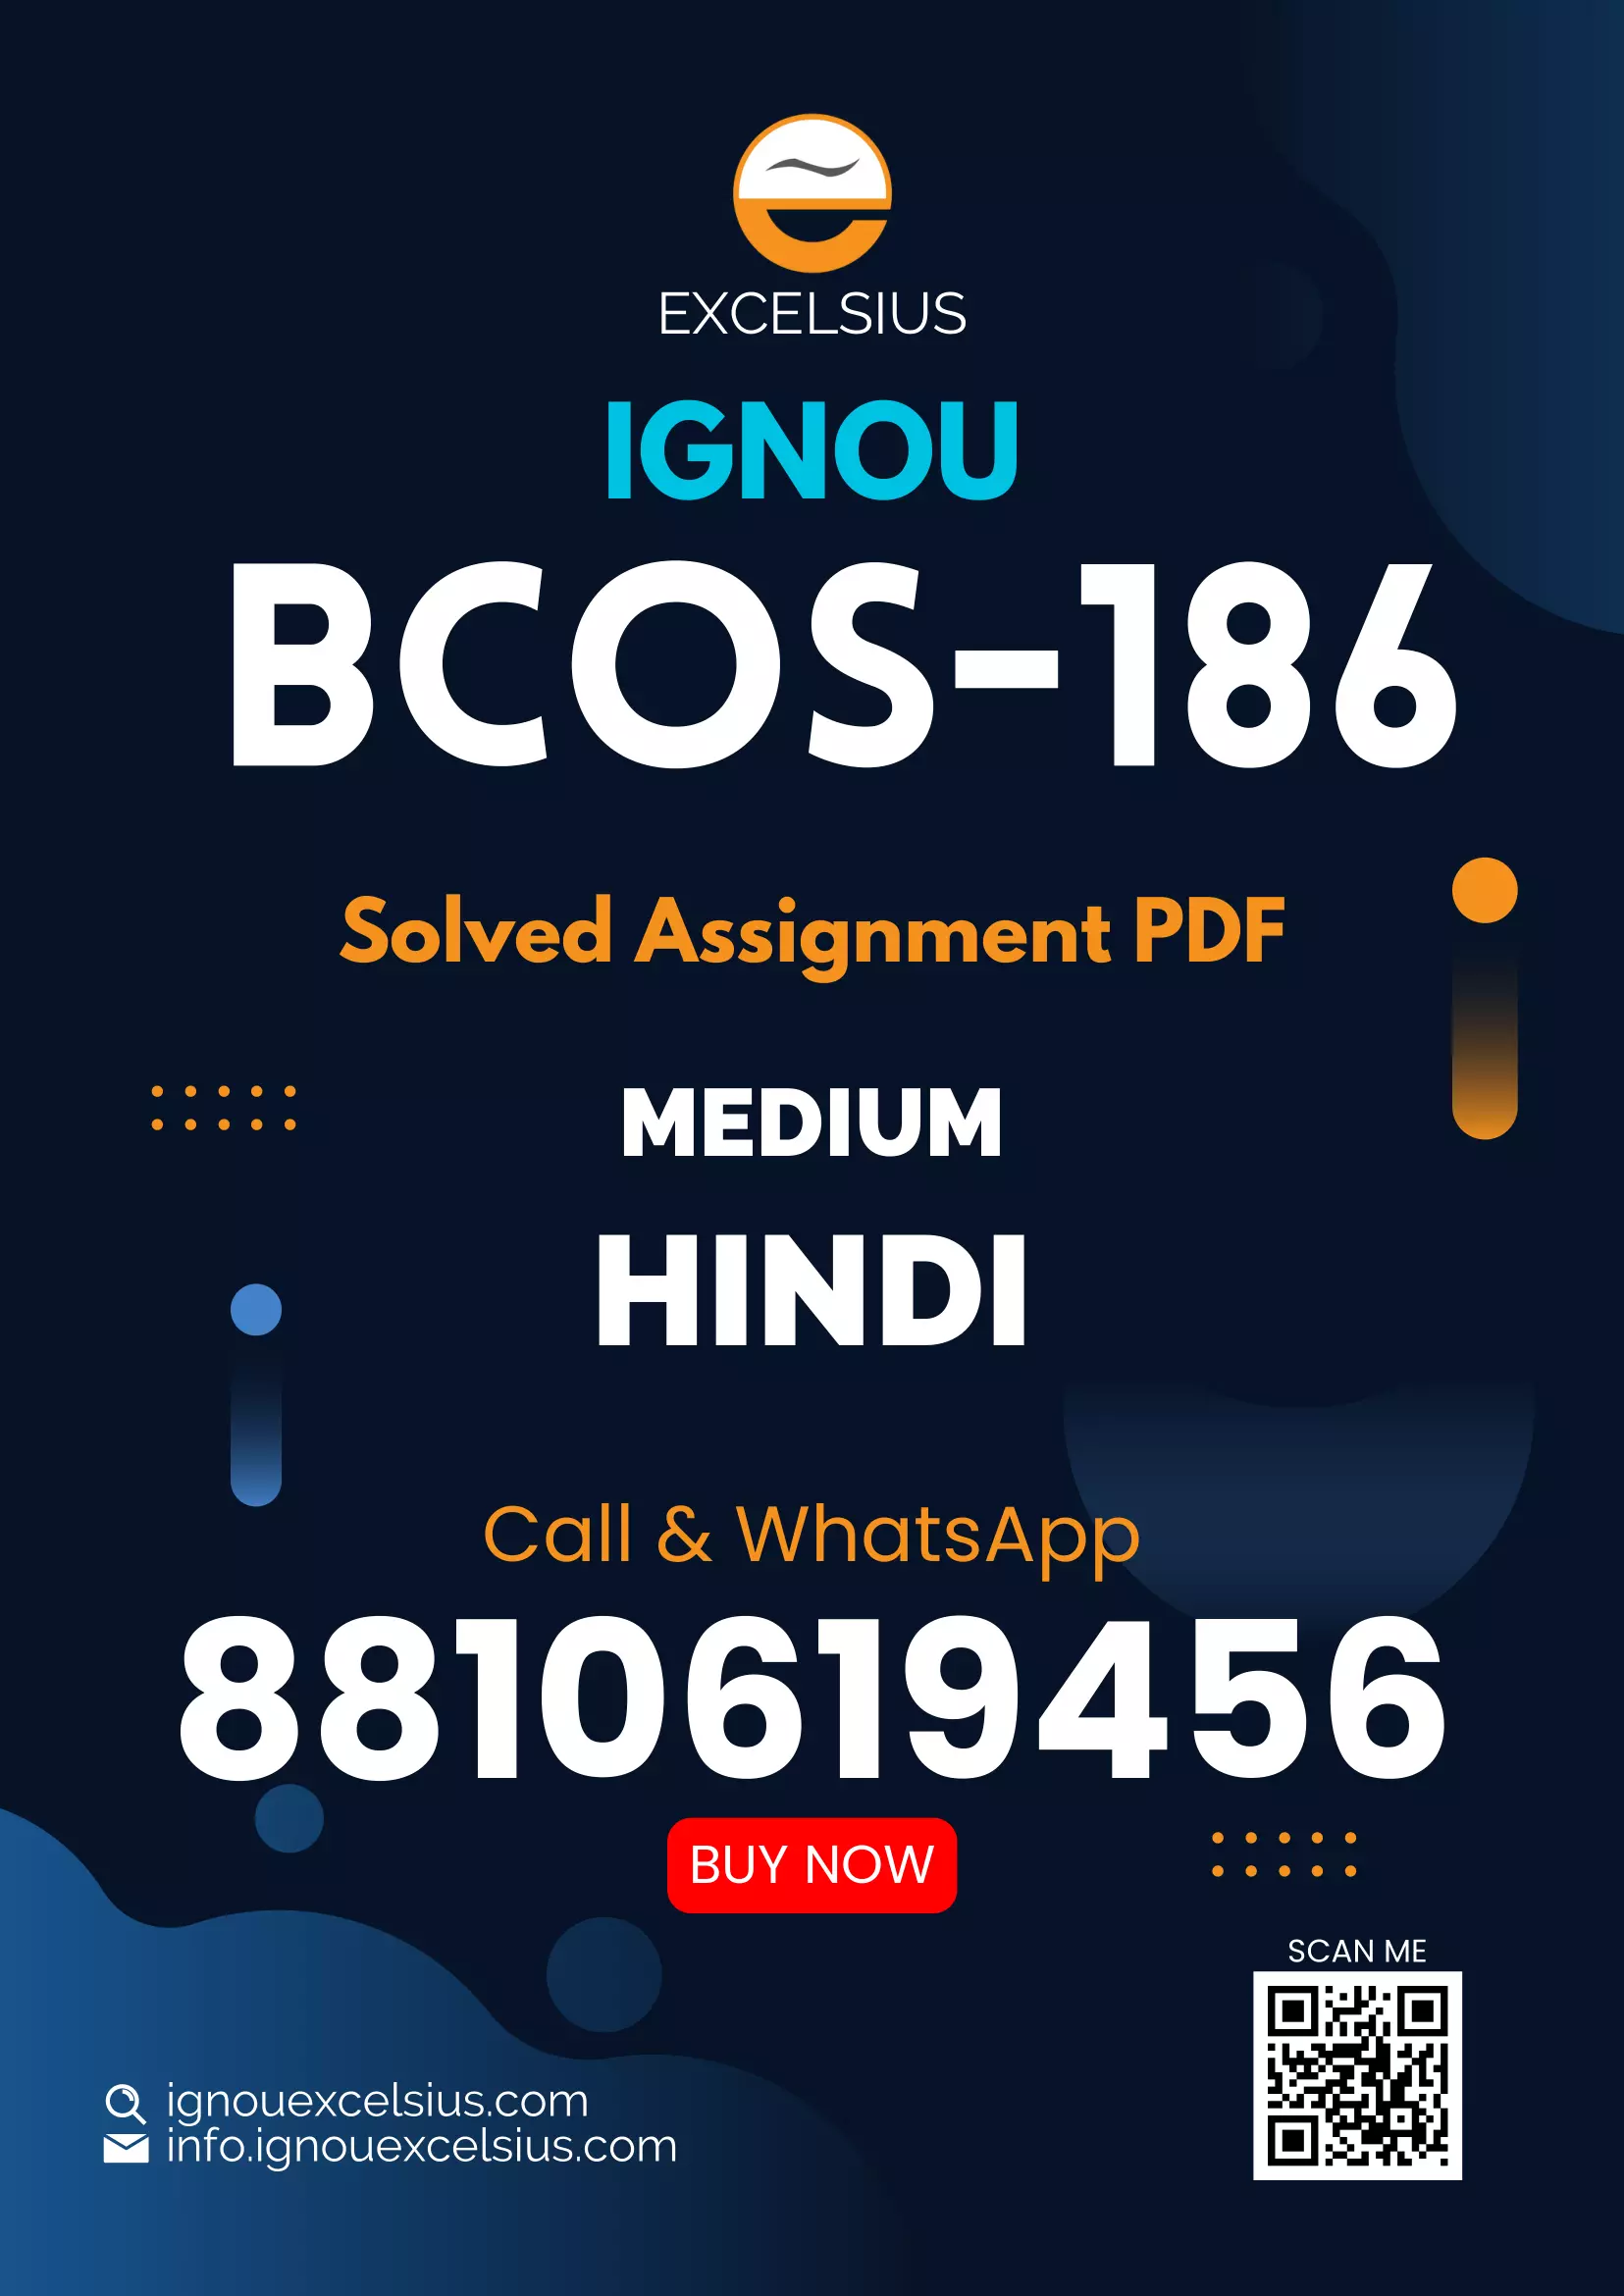 IGNOU BCOS-186 - Personal Selling and Salesmanship, Latest Solved Assignment-January 2023 - December 2023